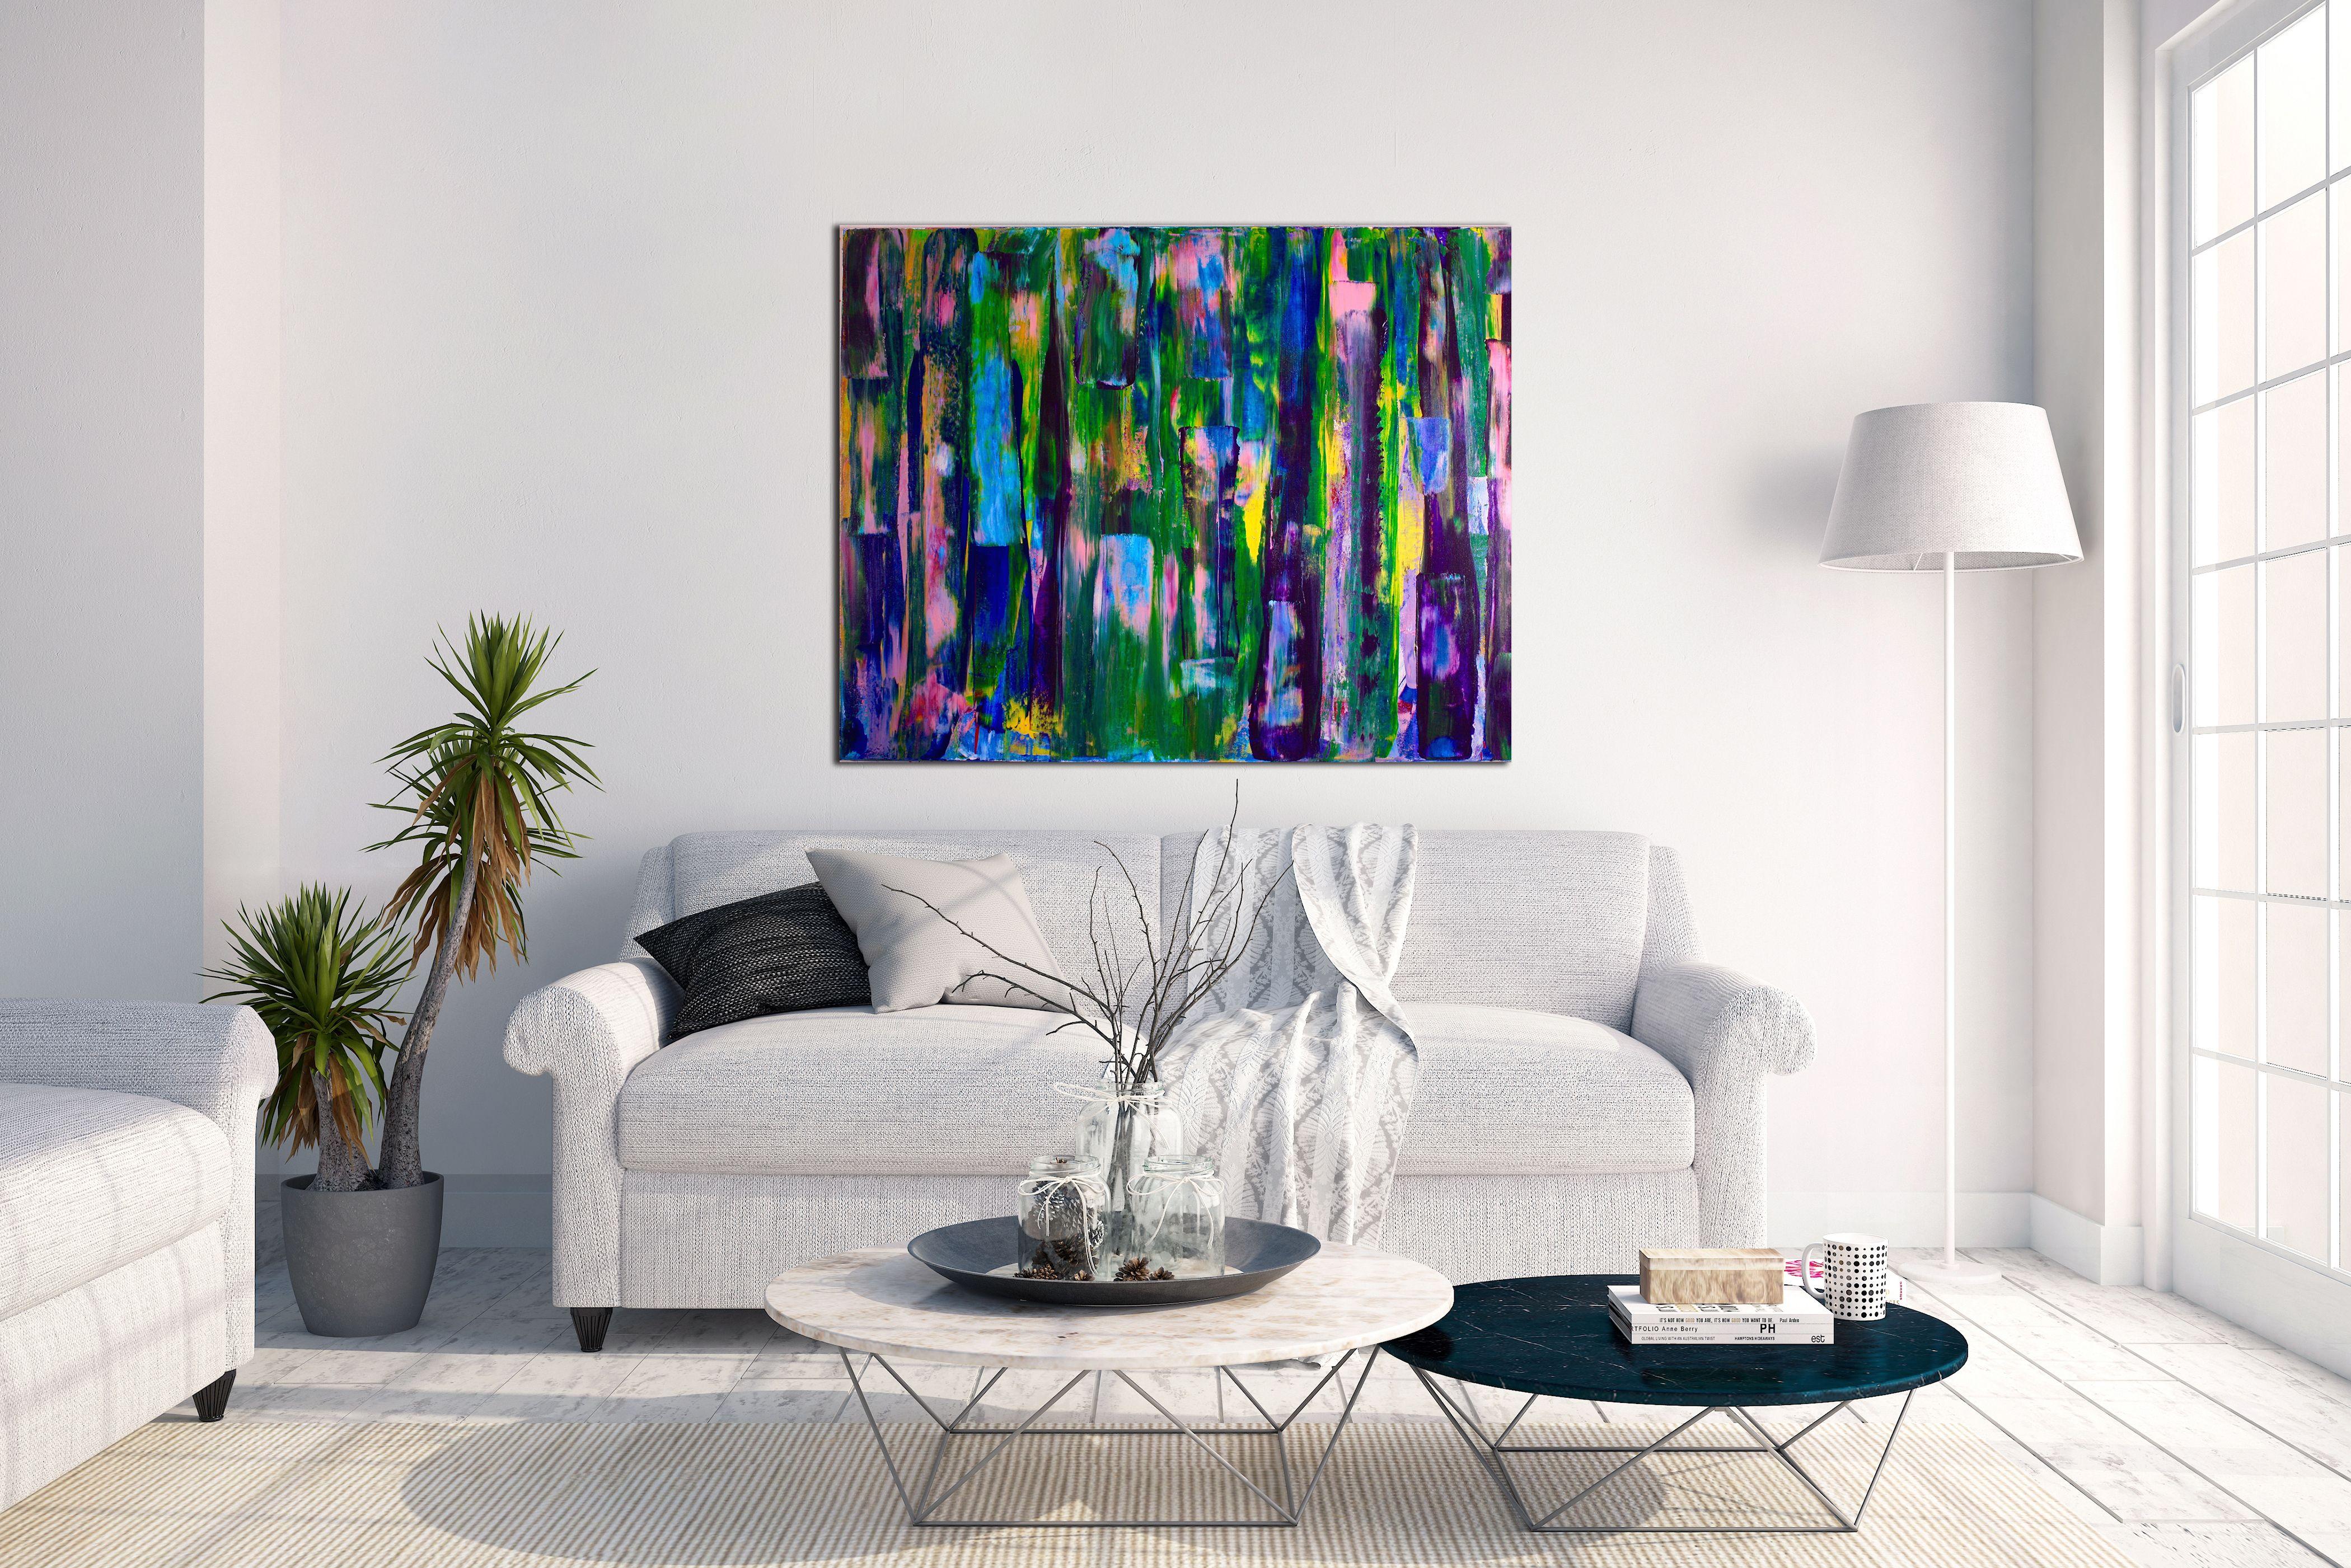 - SIGNED CANVAS  - SIGNED CERTIFICATE OF AUTHENTICITY  - BOLD STATEMENT PIECE    Closeness and depth interchanged throughout the painting represented by organic shapes, lines and rapid shifts in color. This piece is all about color blending for bold